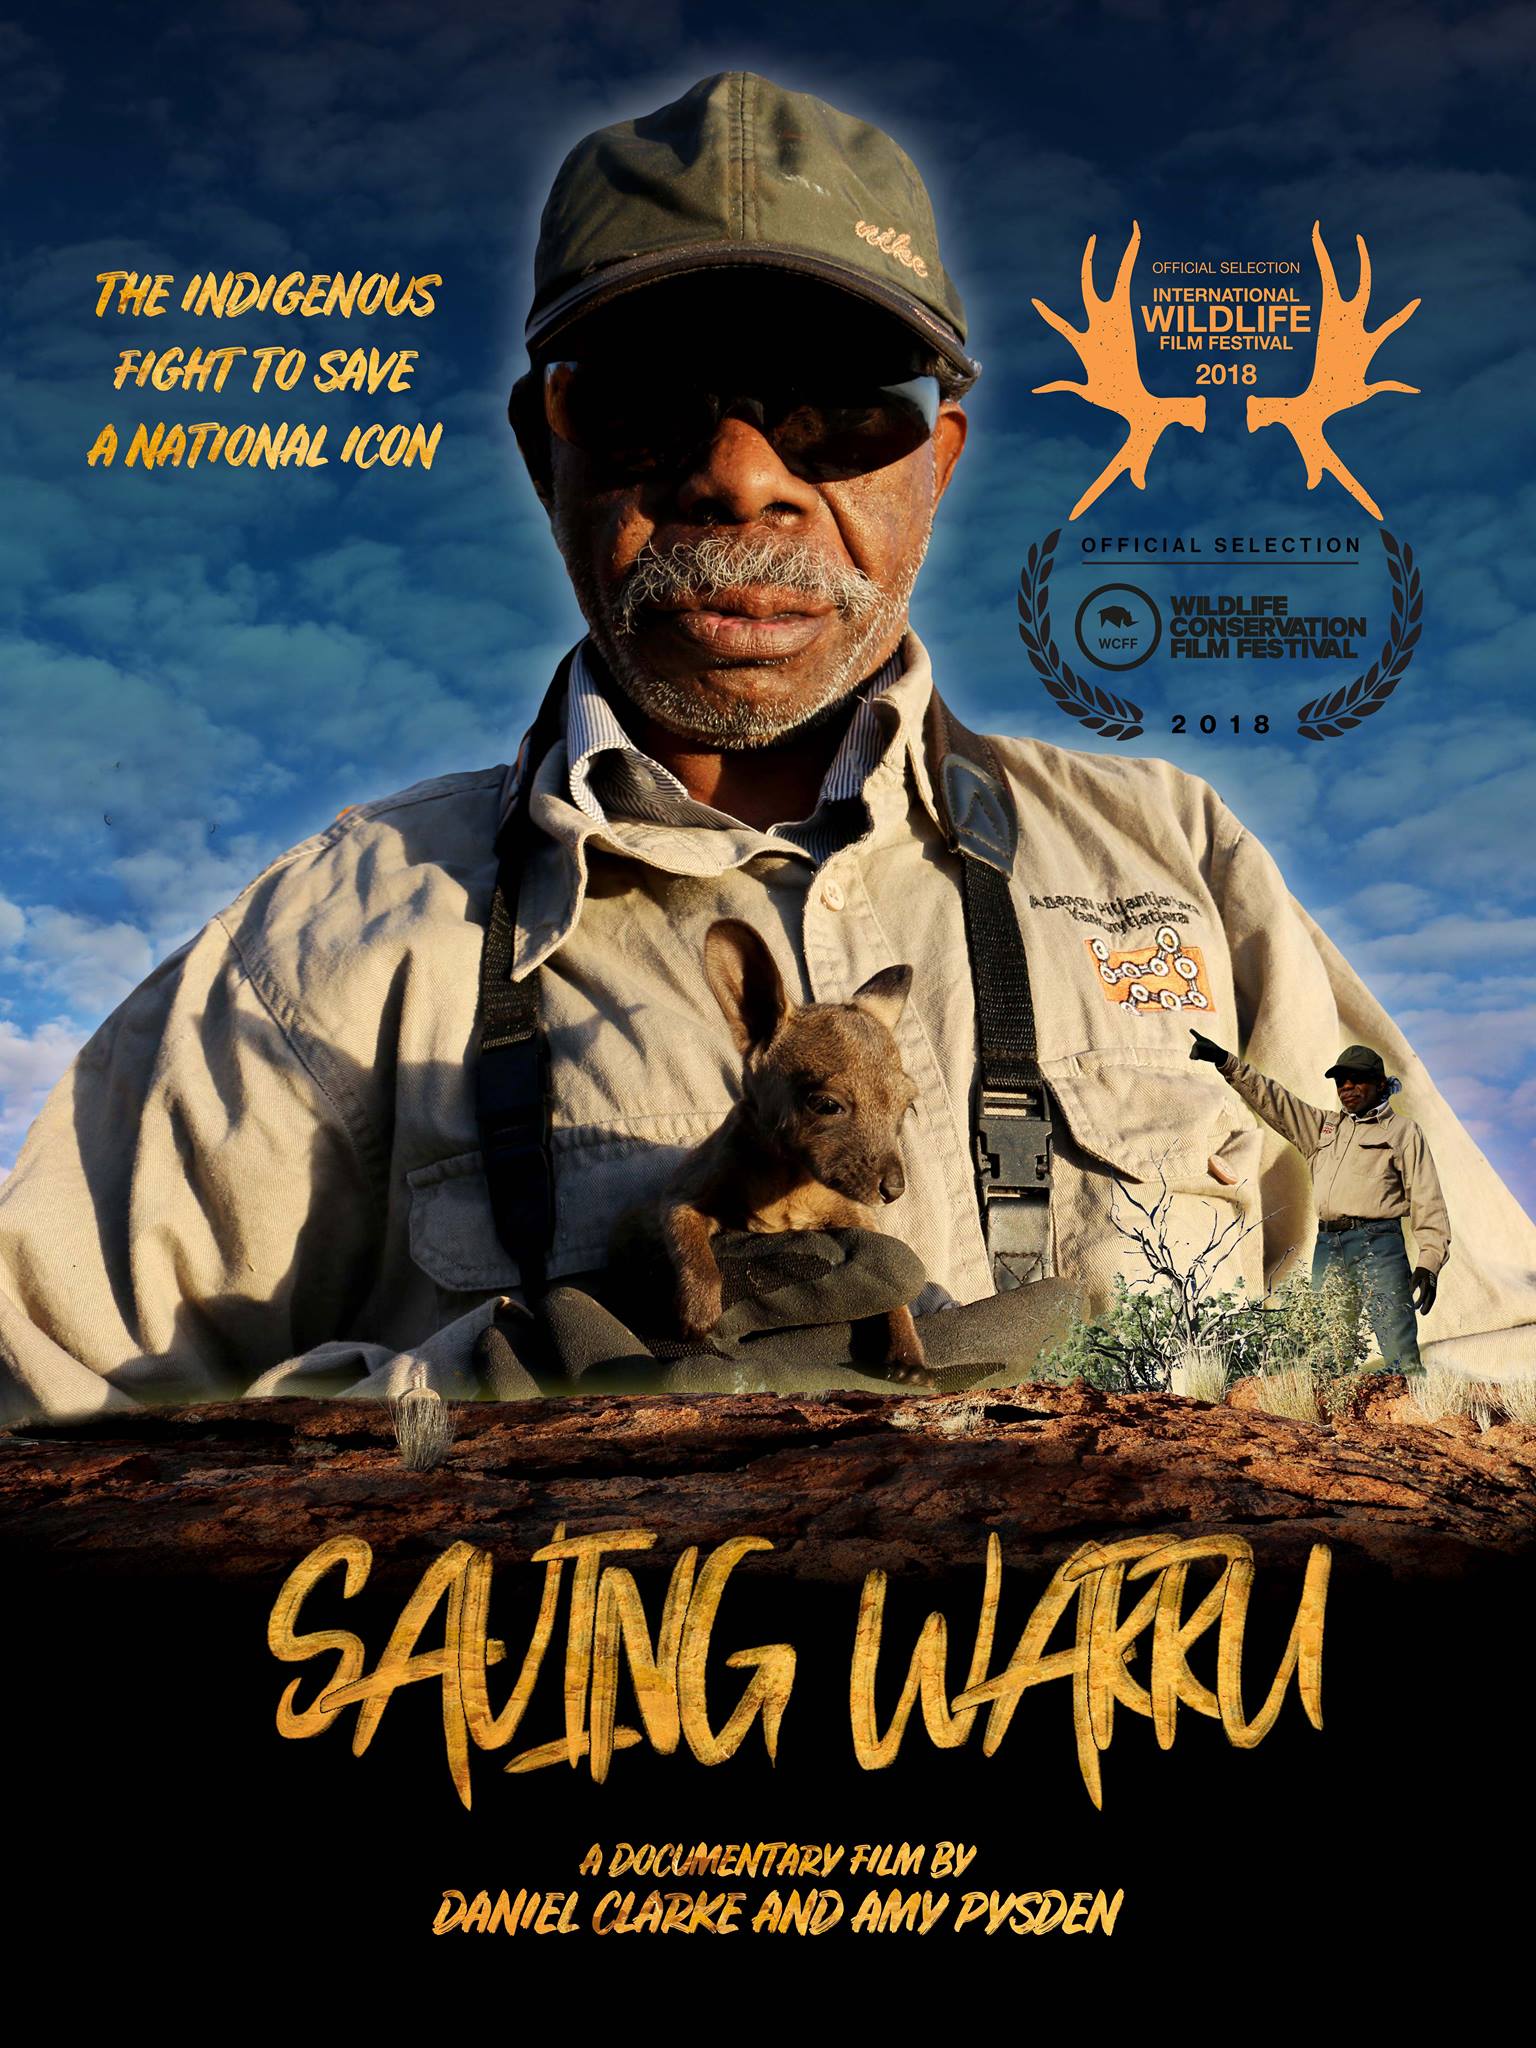 Indigenous man holding small black-footed rock wallaby against blue cloudy sky. Writing - The Indigenous fight to save a national icon. A documentary film by Daniel Clarke and Amy Pysden. Official selection International Wildlife Film Festival 2018. Official Selection Wildlife Conservation Film Festival 2018.